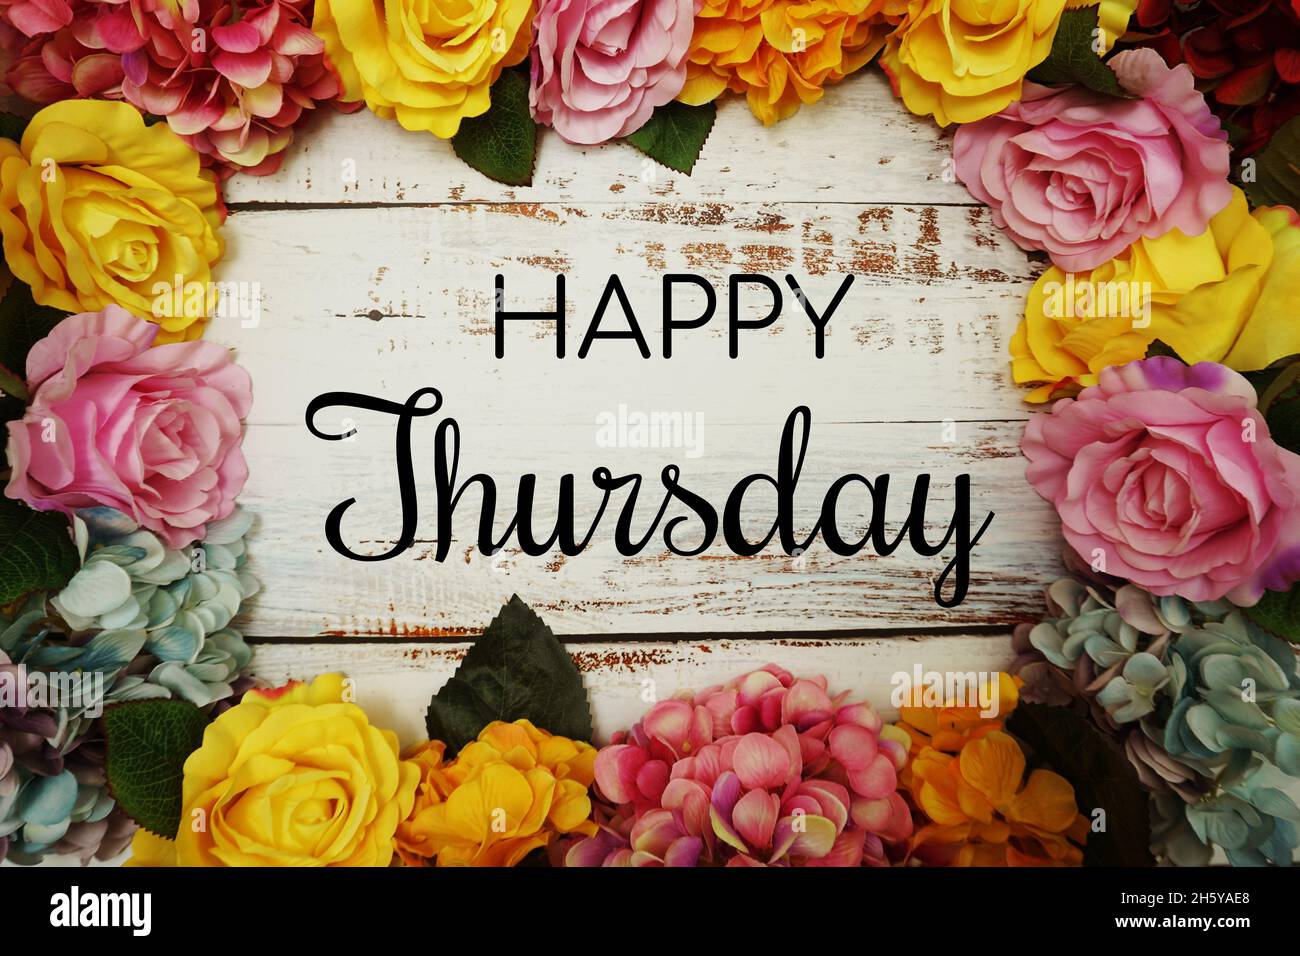 Happy Thursday text and Flowers Colorful Border Frame on wooden ...